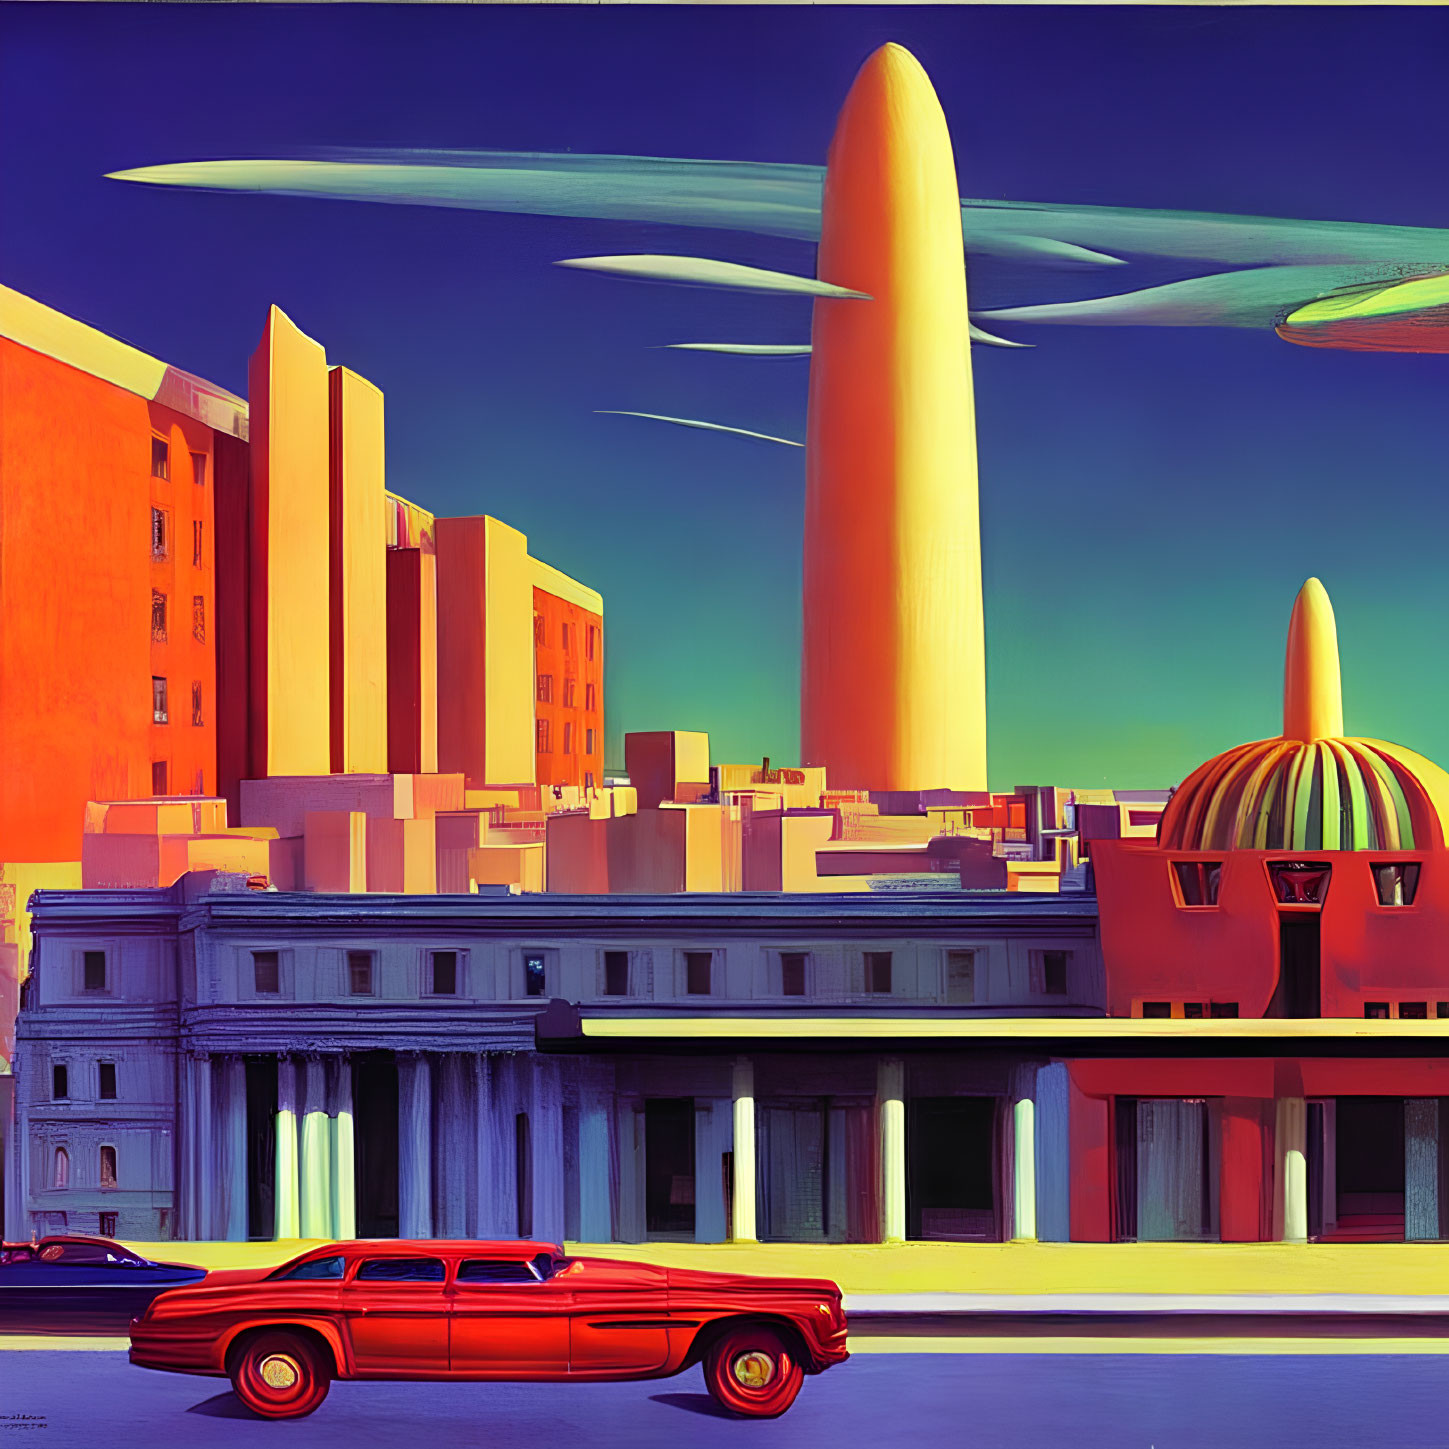 Colorful retro-futuristic painting: Red car in cityscape with stylized buildings and rocket-like